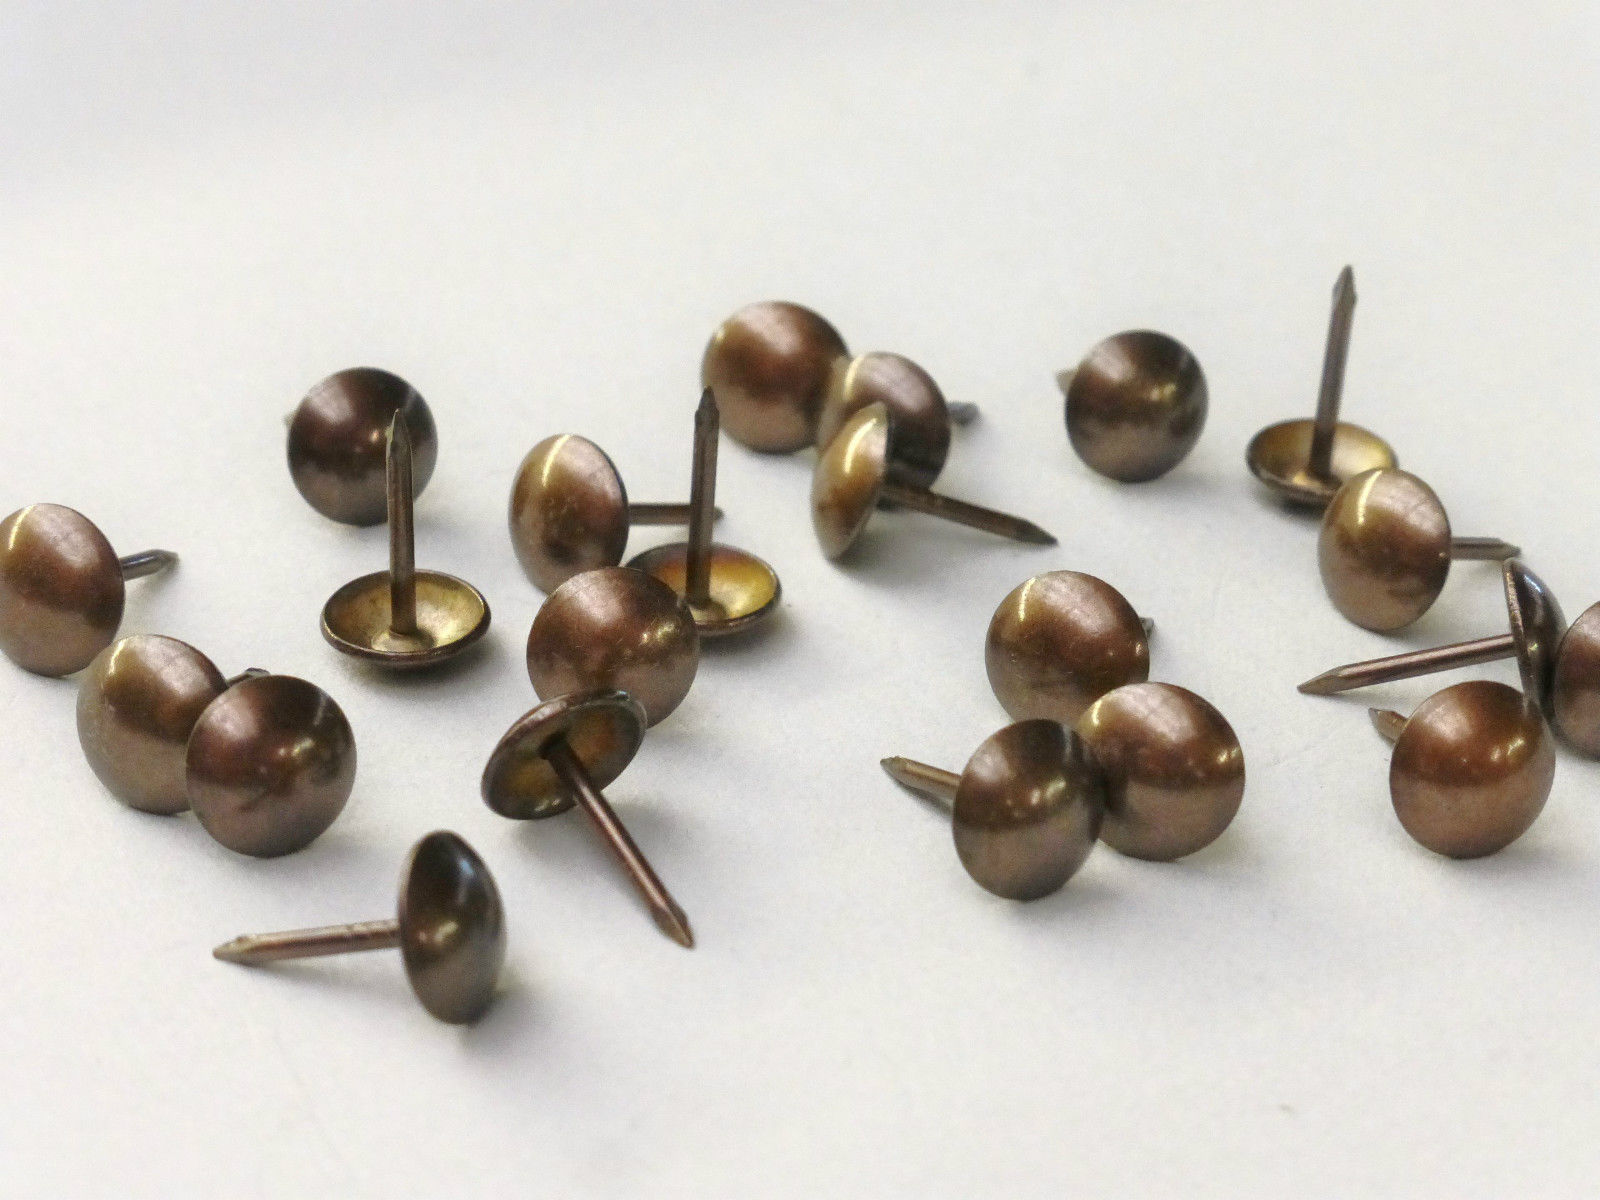 100 ASTER SWIRL UPHOLSTERY NAILS BRASS FURNITURE STUDS 